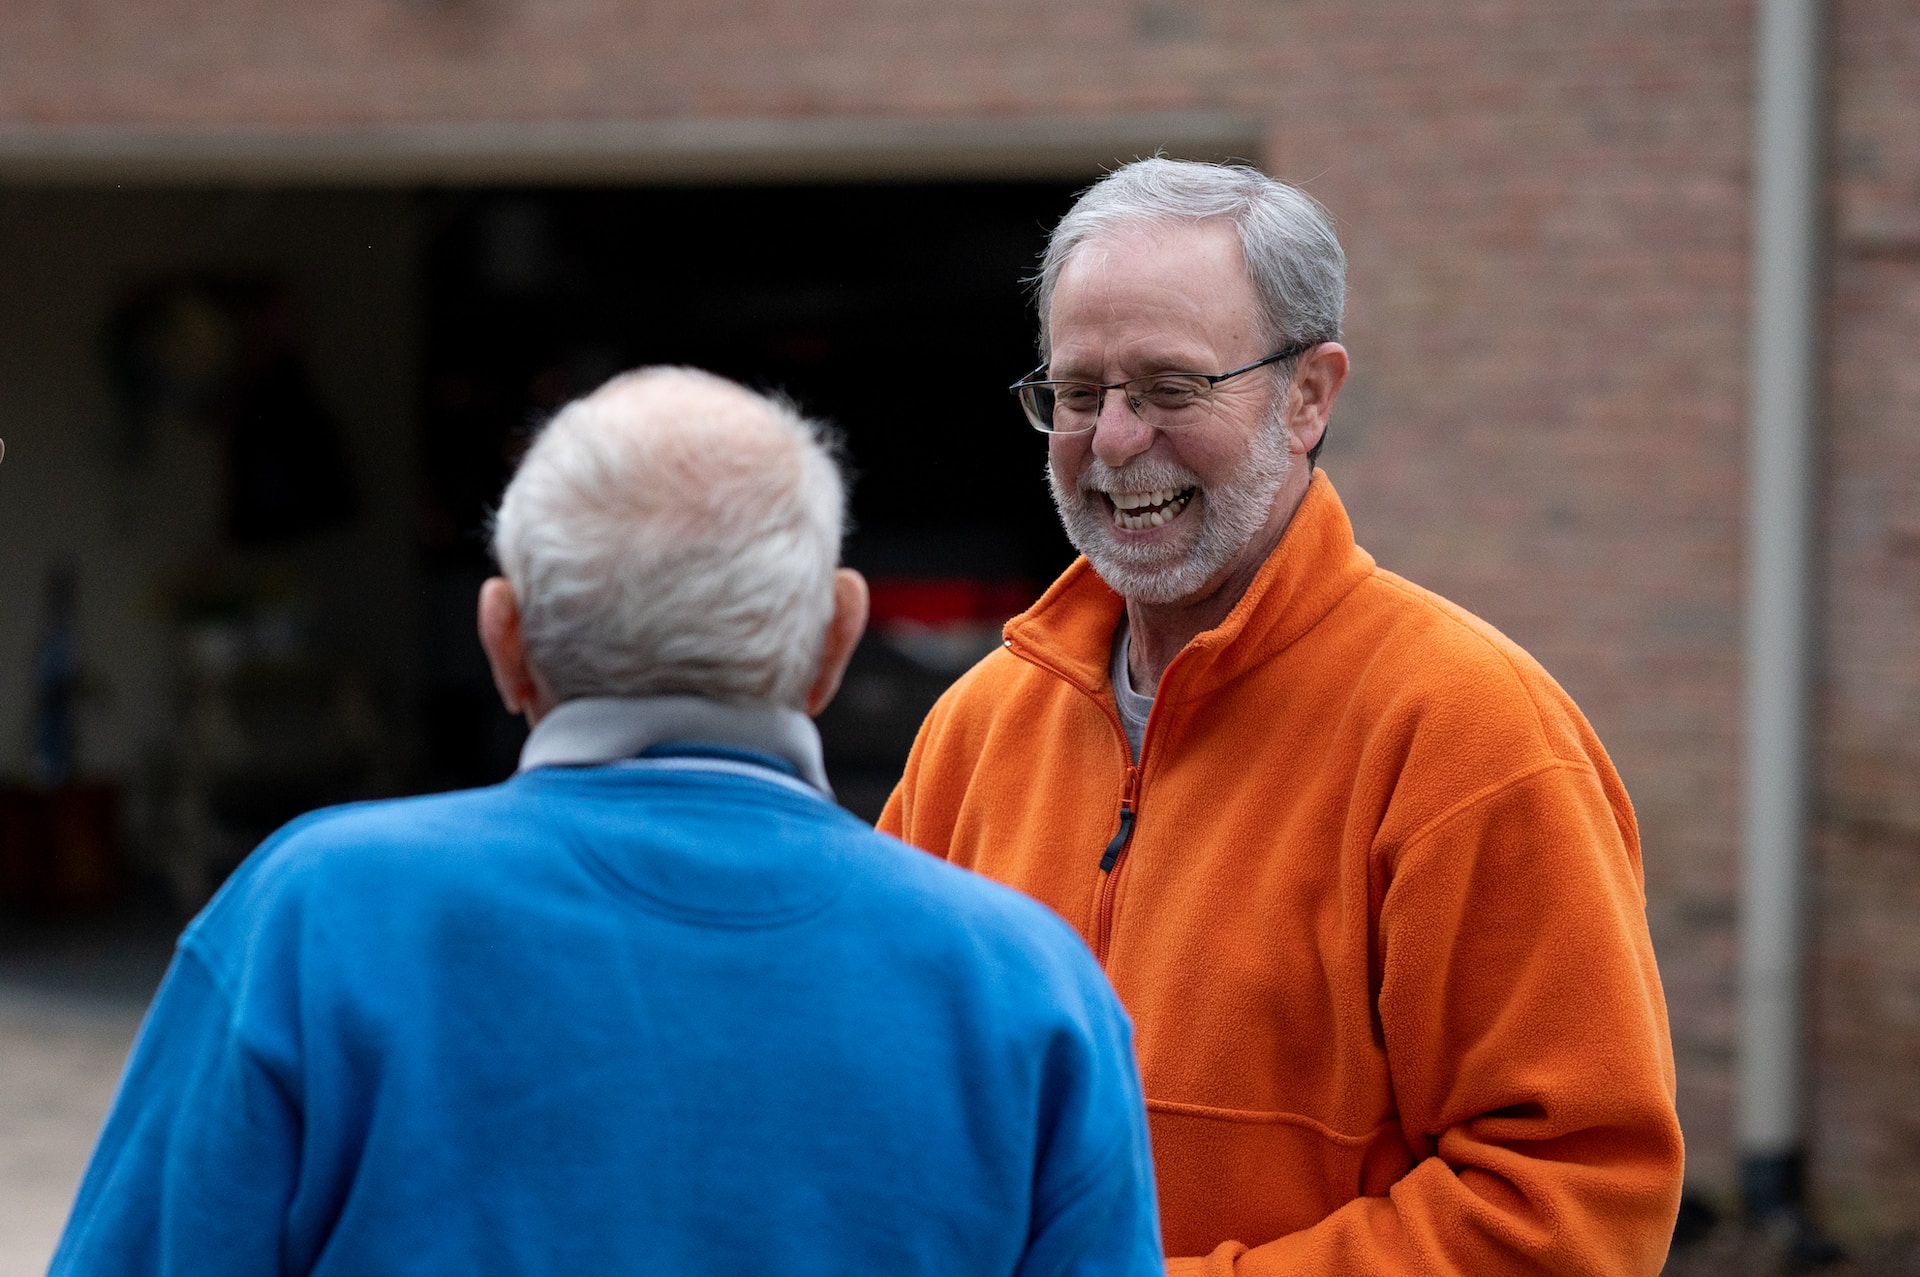 Two men with grey hair facing one another. One in a blue jacket with his back to us. The other in an orange jacket is smiling towards him